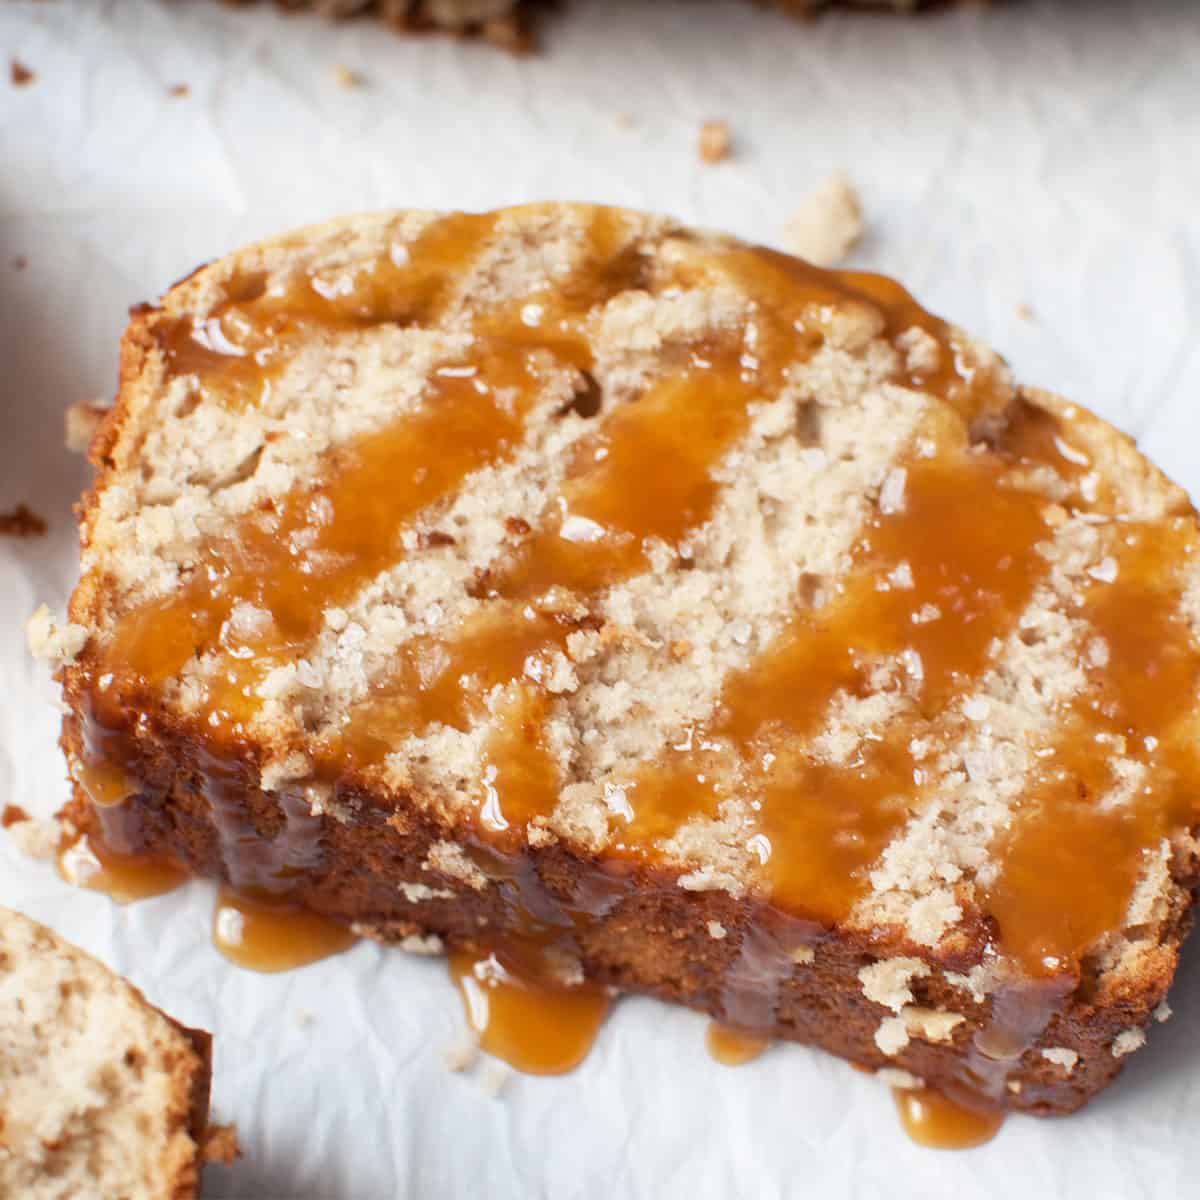 One slice of banana bread covered in caramel and sea salt.